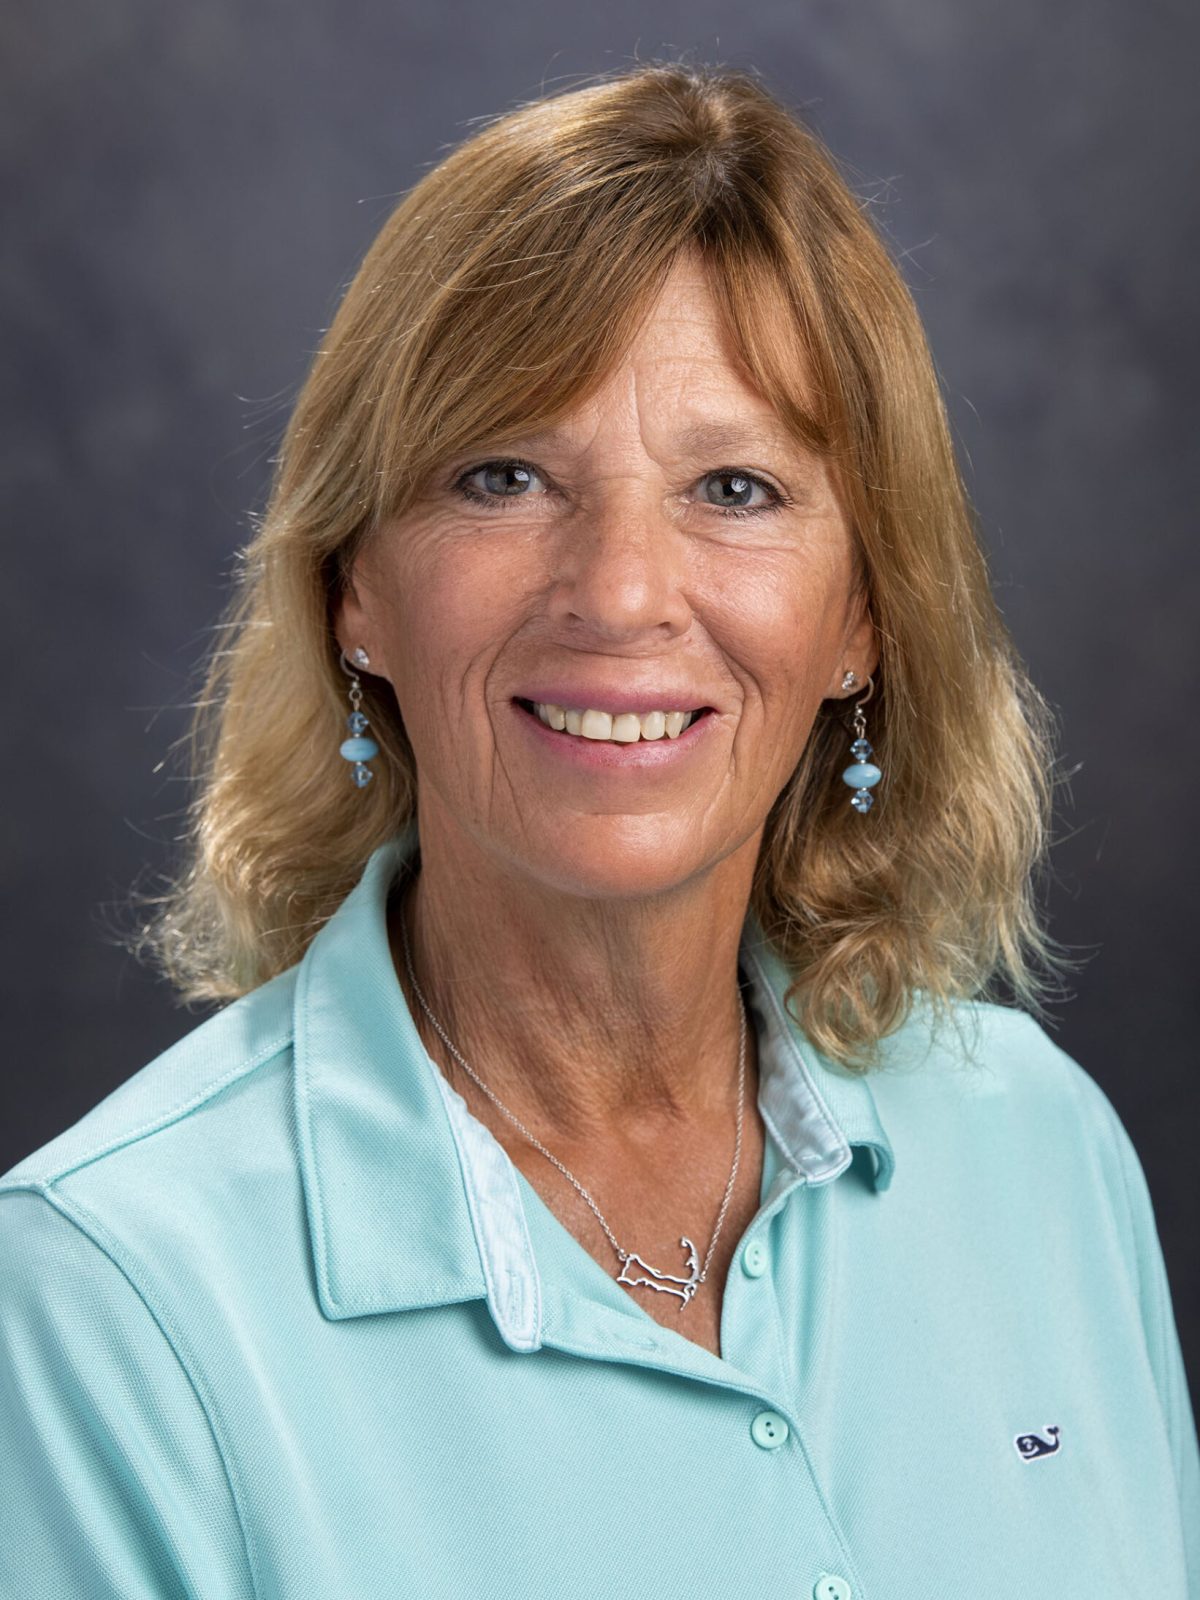 Deb Keim, Assistant Golf Professional at the Shell Point Golf Club